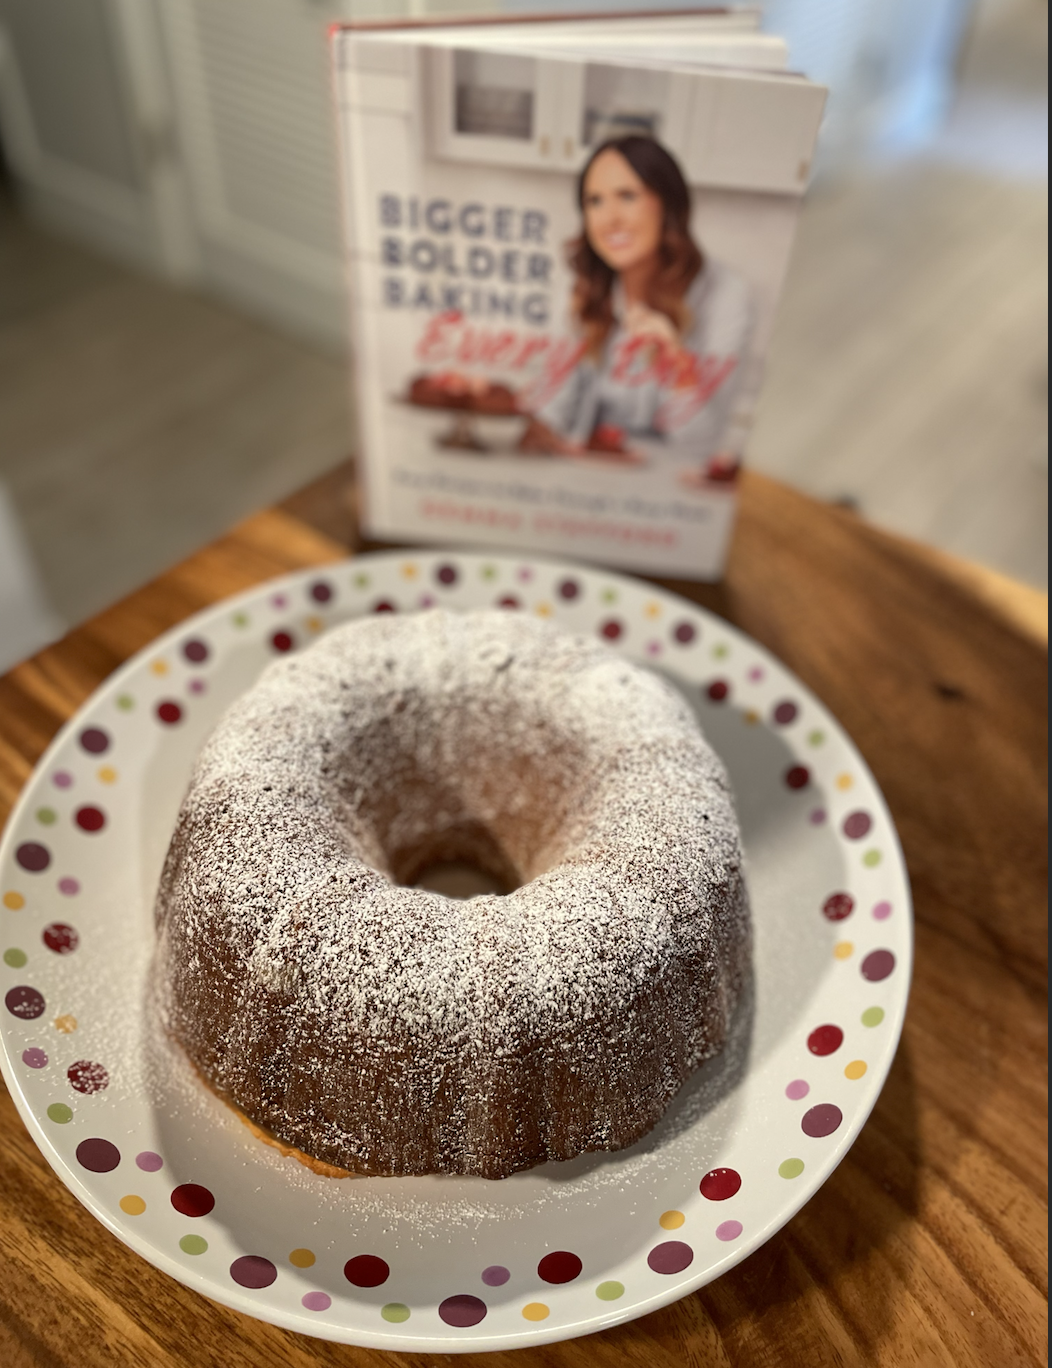 photo of a bundt cake dusted with powdered sugar on a dotted serving platter on a wooden table next to the cookbook Bigger Bolder Baking Every Day